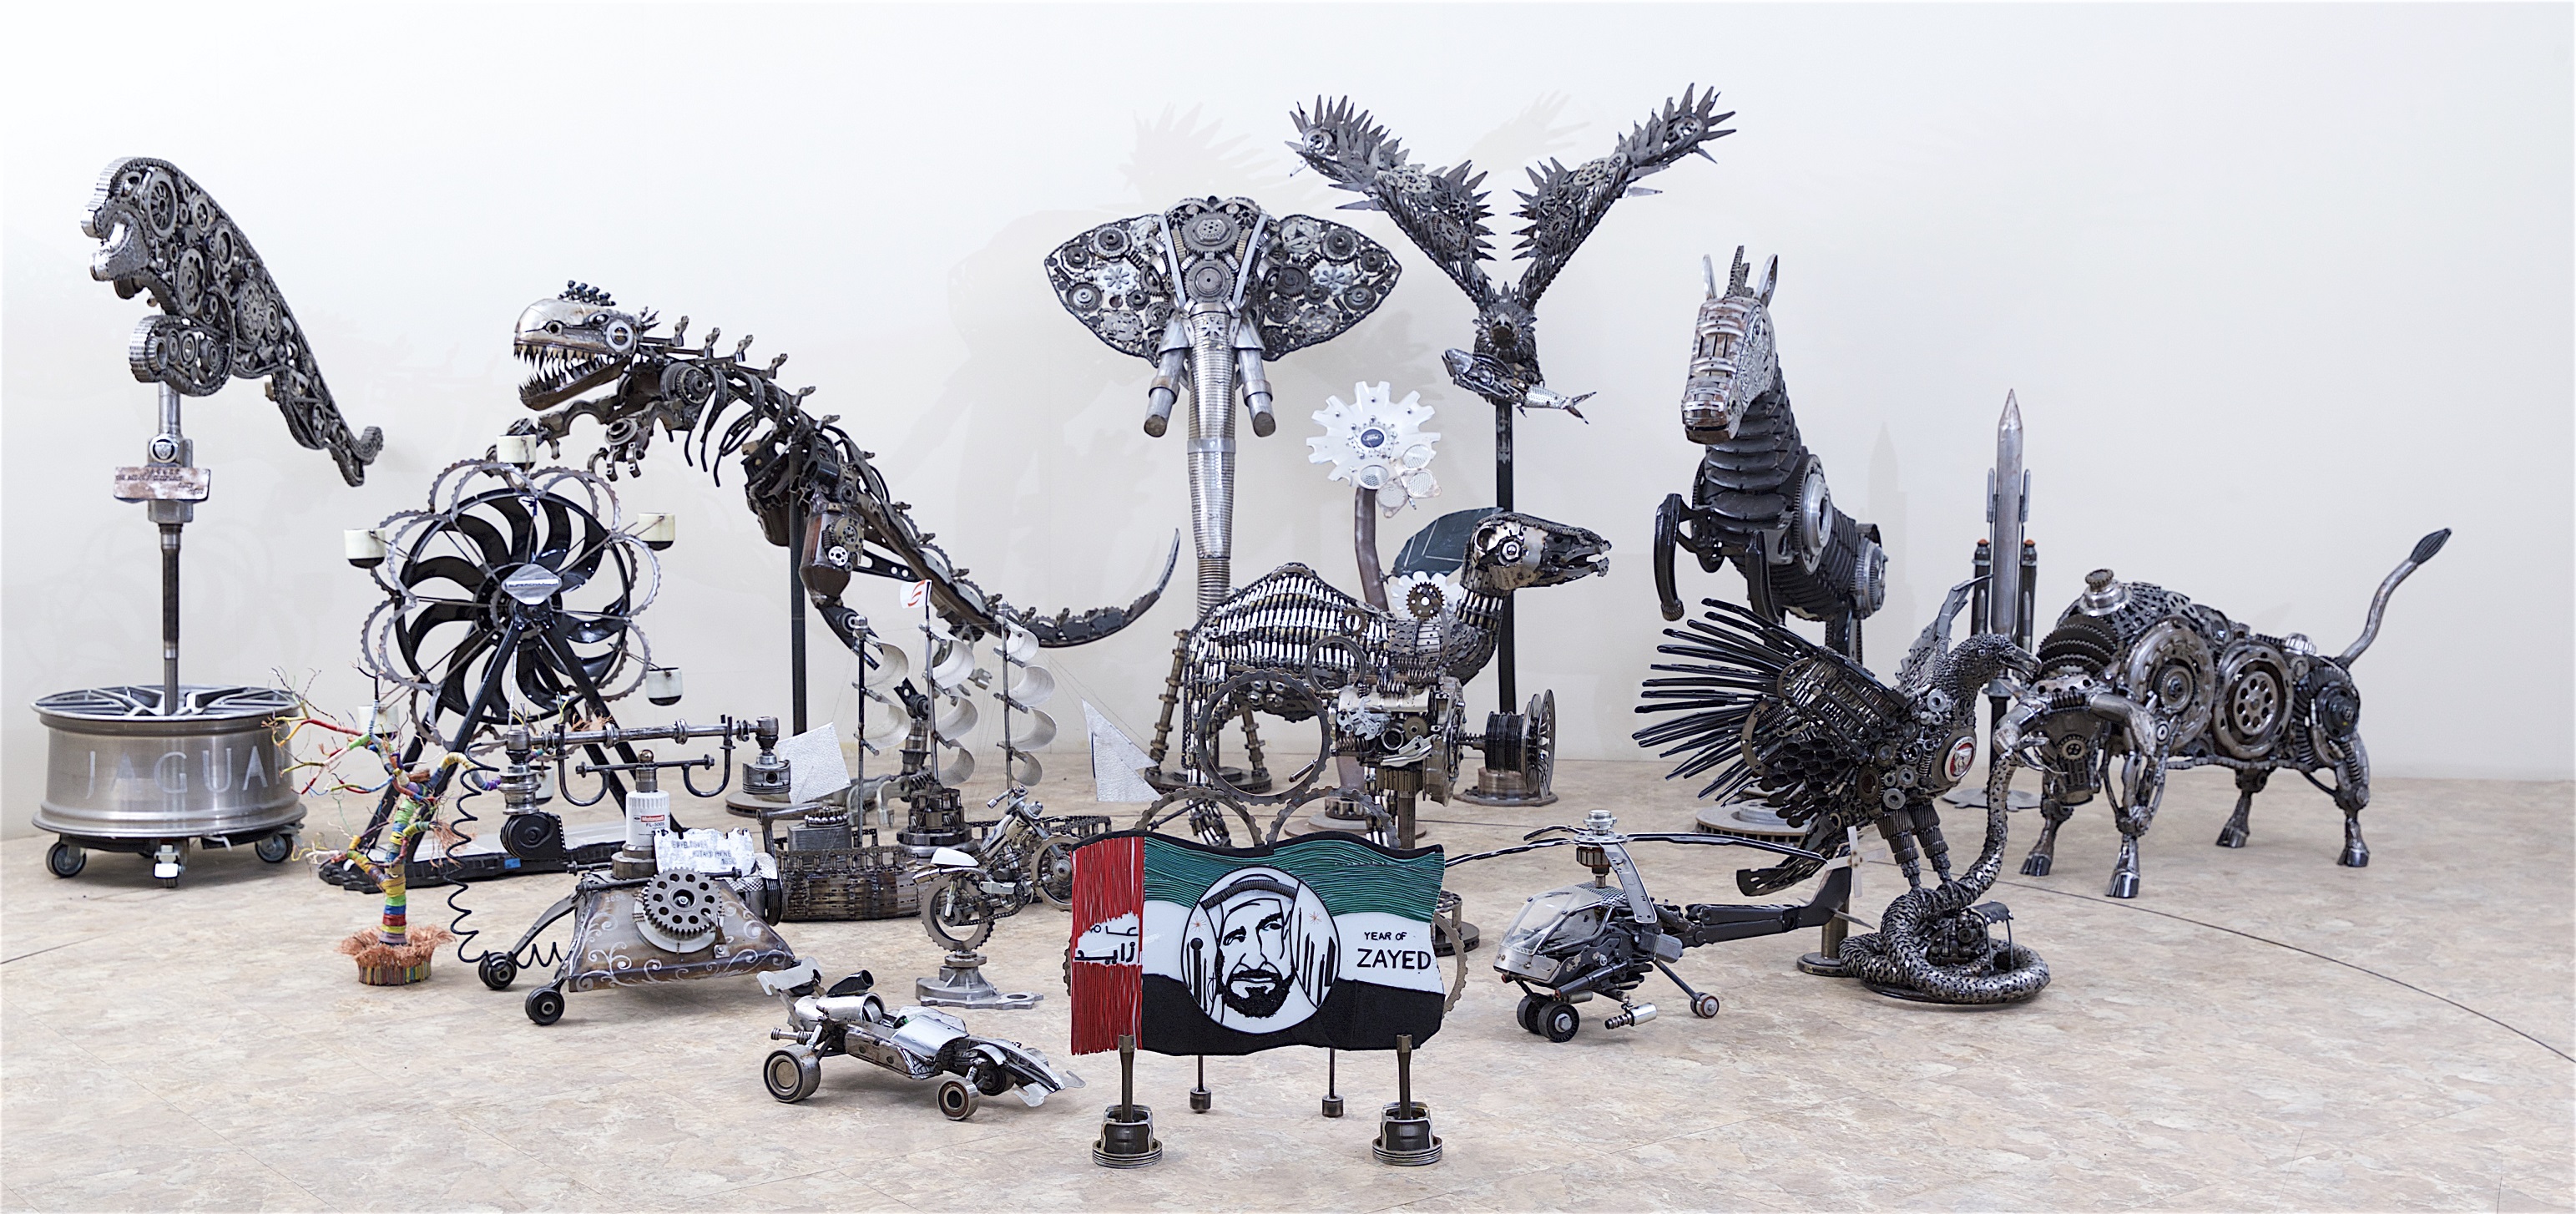 Al Tayer Motors to Showcase Art from Discarded Parts